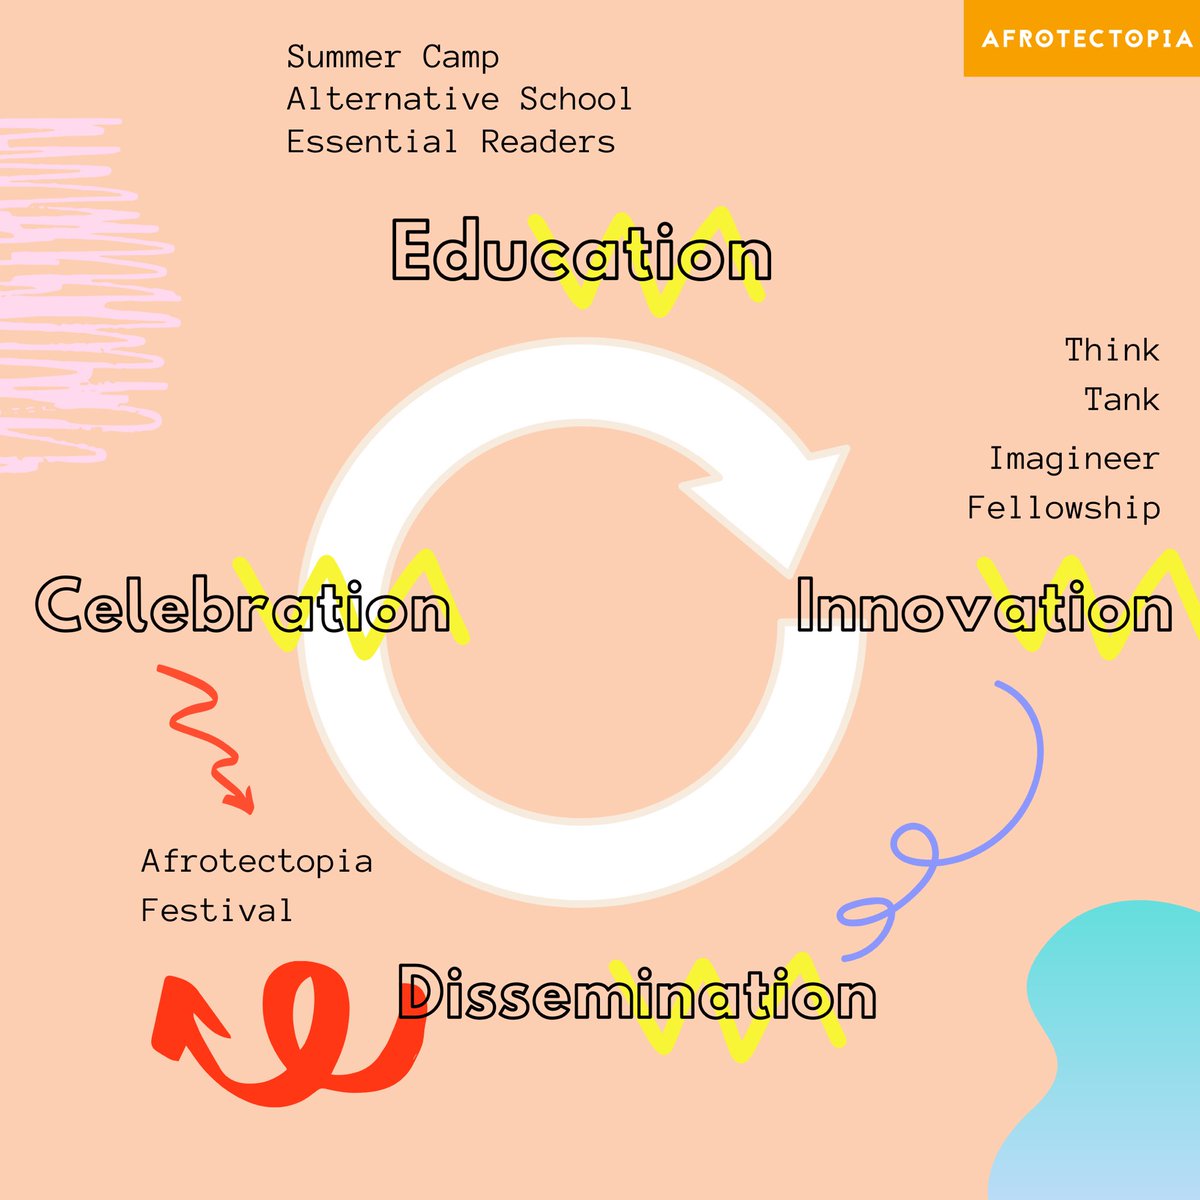 All of these initiatives perfectly tie into the Afrotectopia Ecosystem as we build community around a vibrant cycle of education, innovation, dissemination, and celebration.